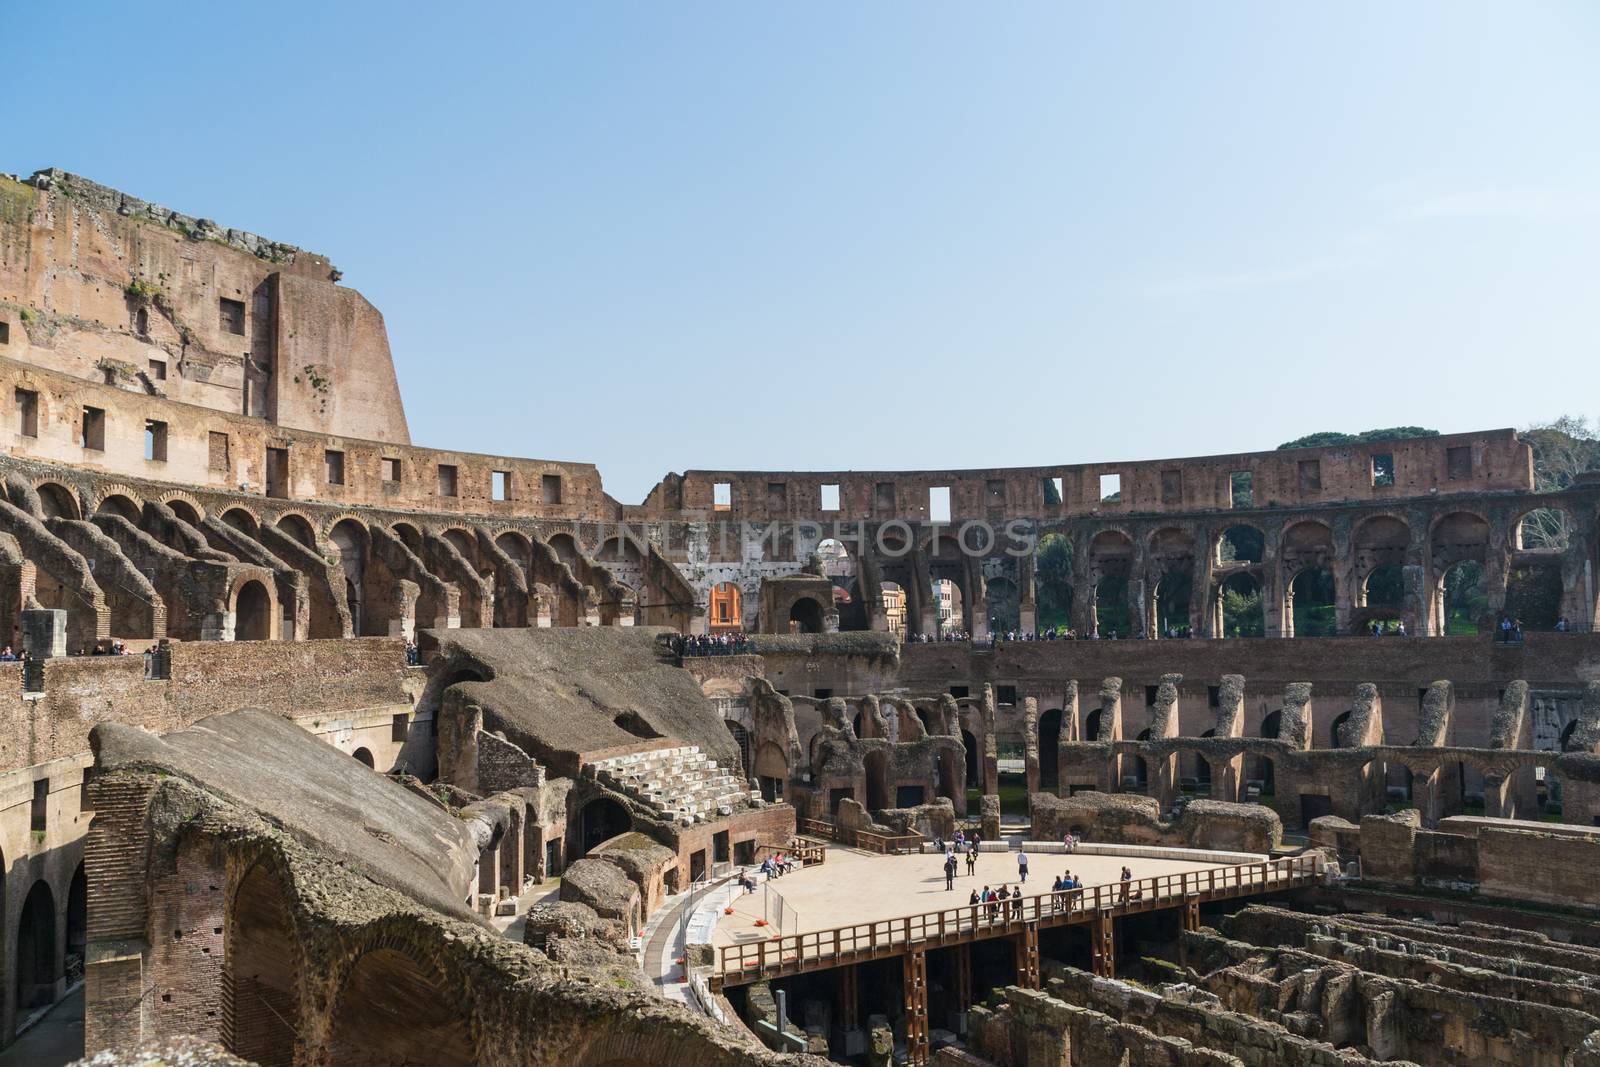 View of the Colosseum ruins in Rome, inside